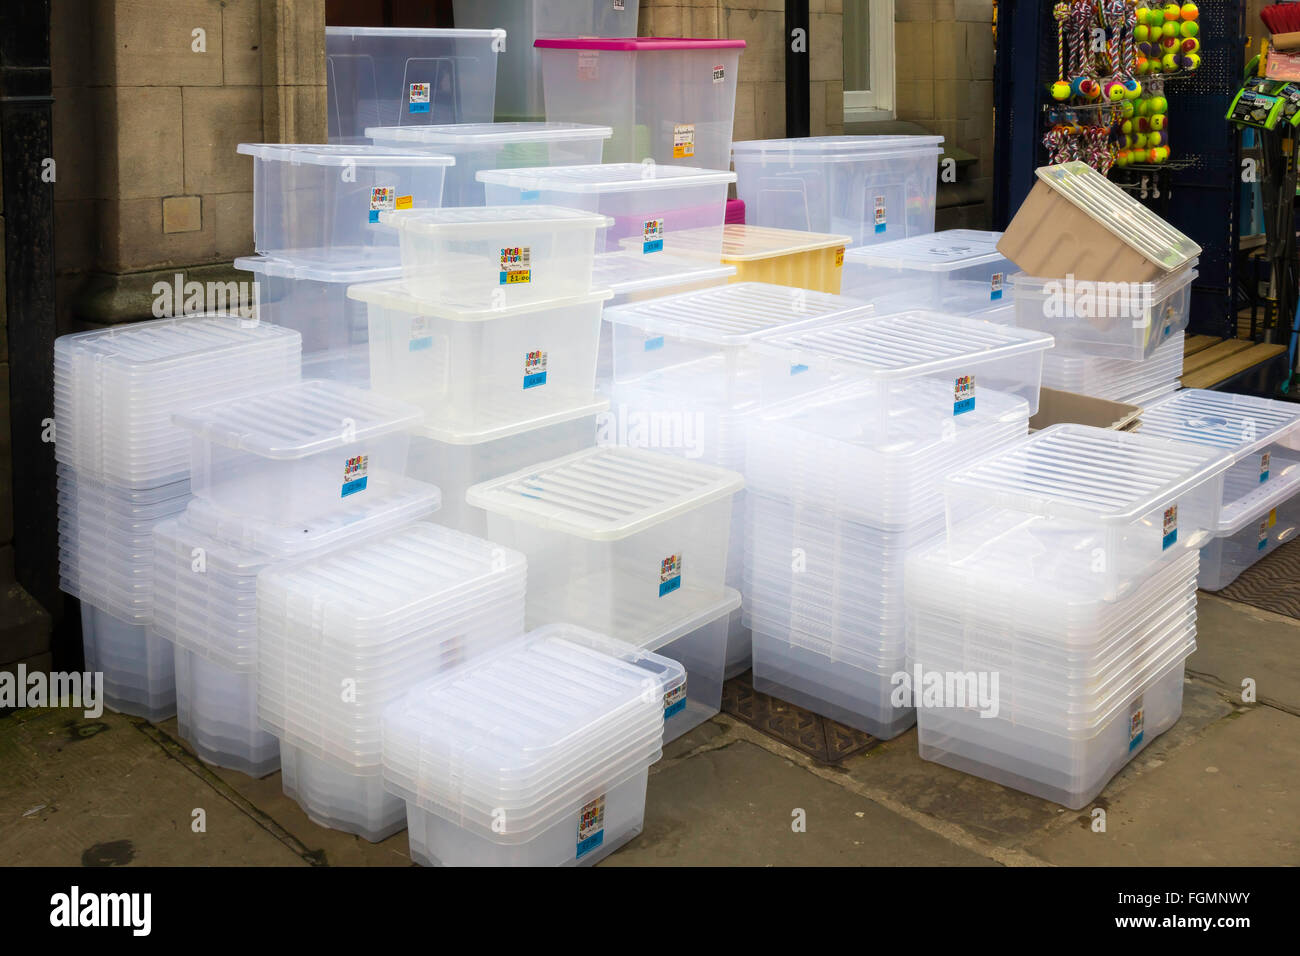 Plastic storage boxes of various sizes for sale outside an English Hardware Store Stock Photo